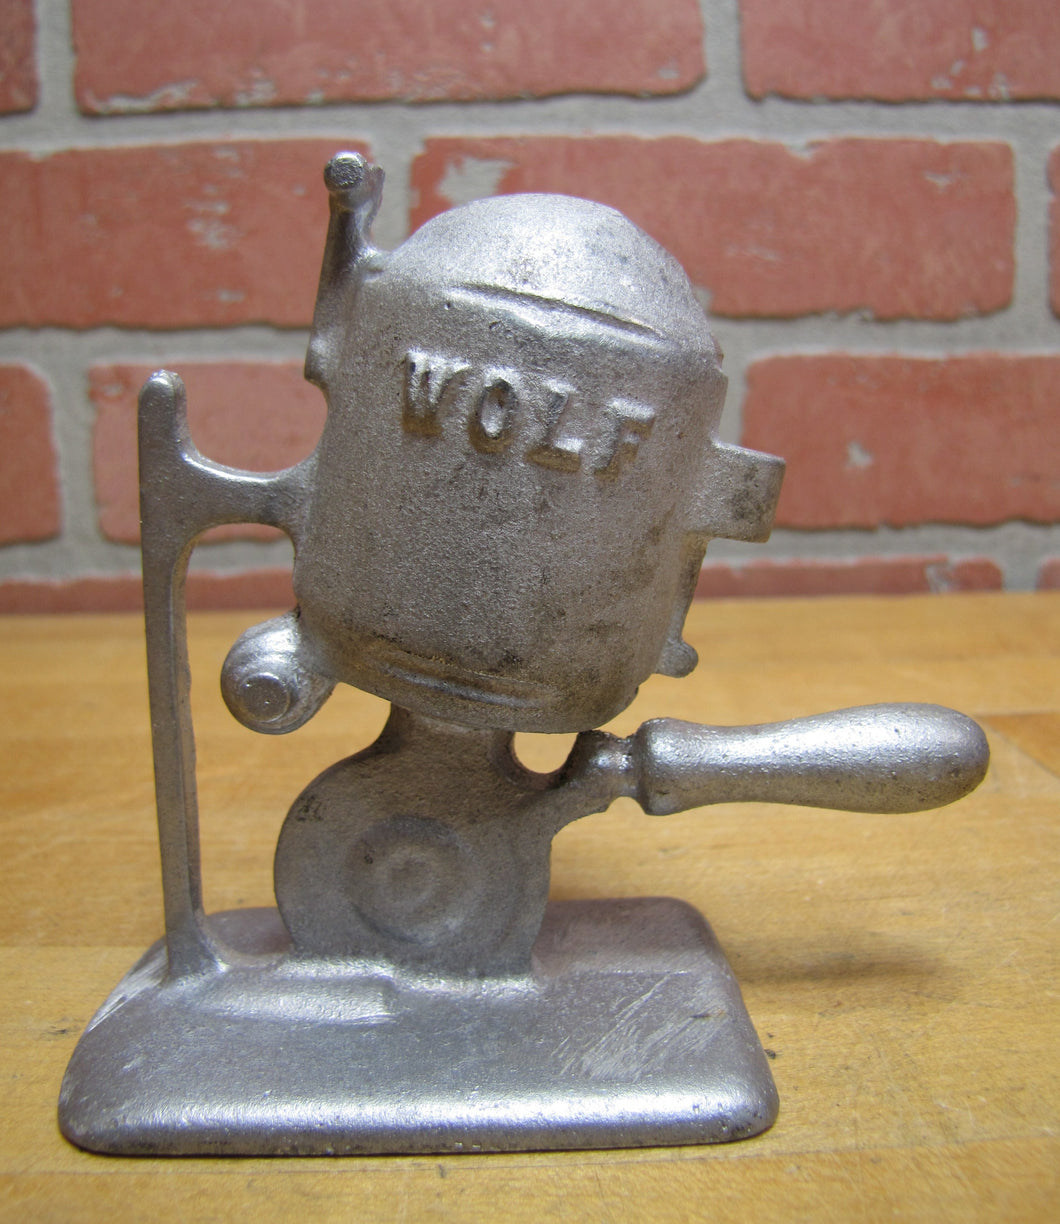 WOLF Cloth Cutting Machine Advertising Promo Salesman Sample Size Figural Paperweight